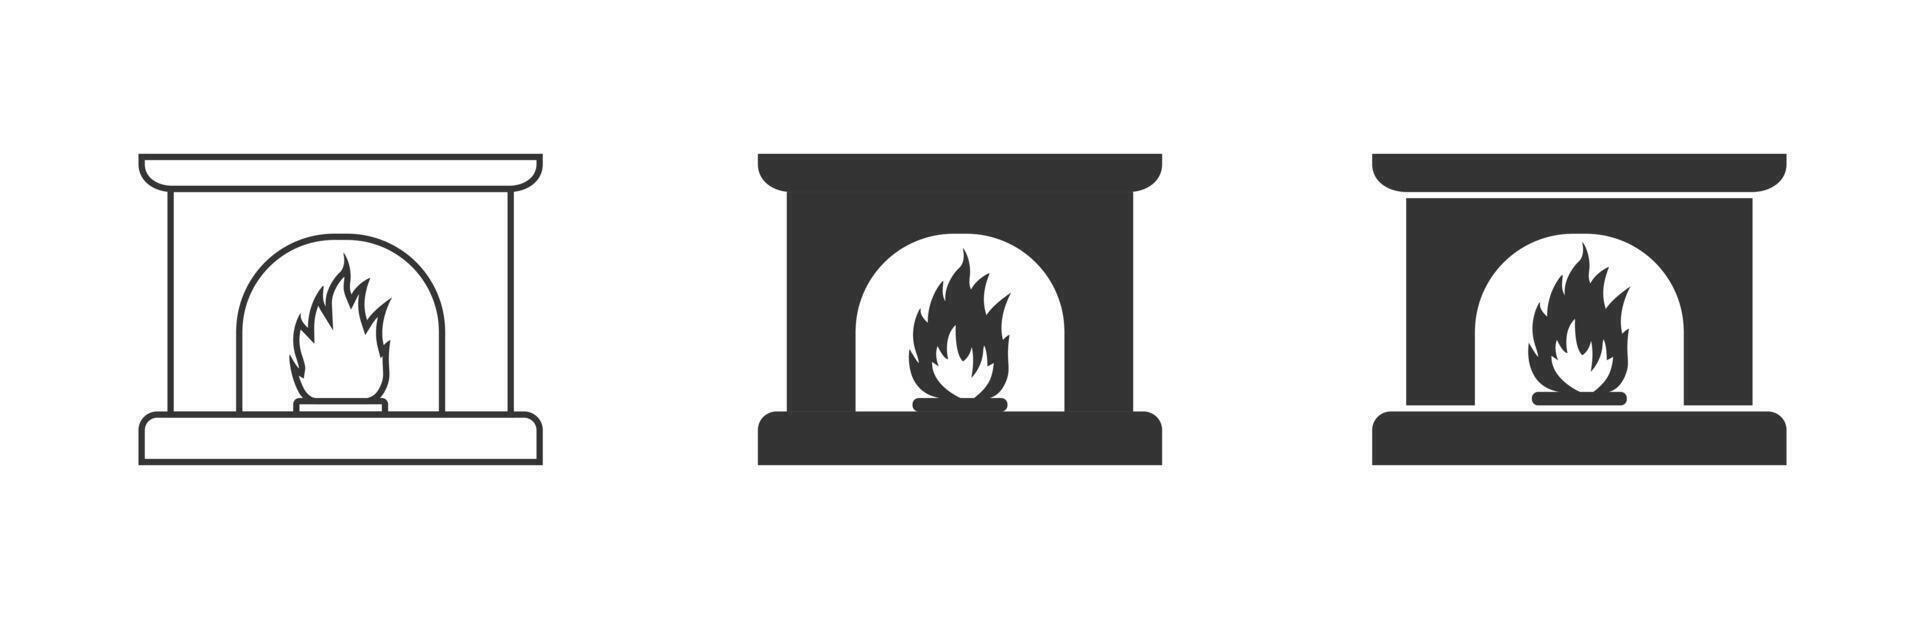 Fireplace icon. Simple design. Vector illustration.